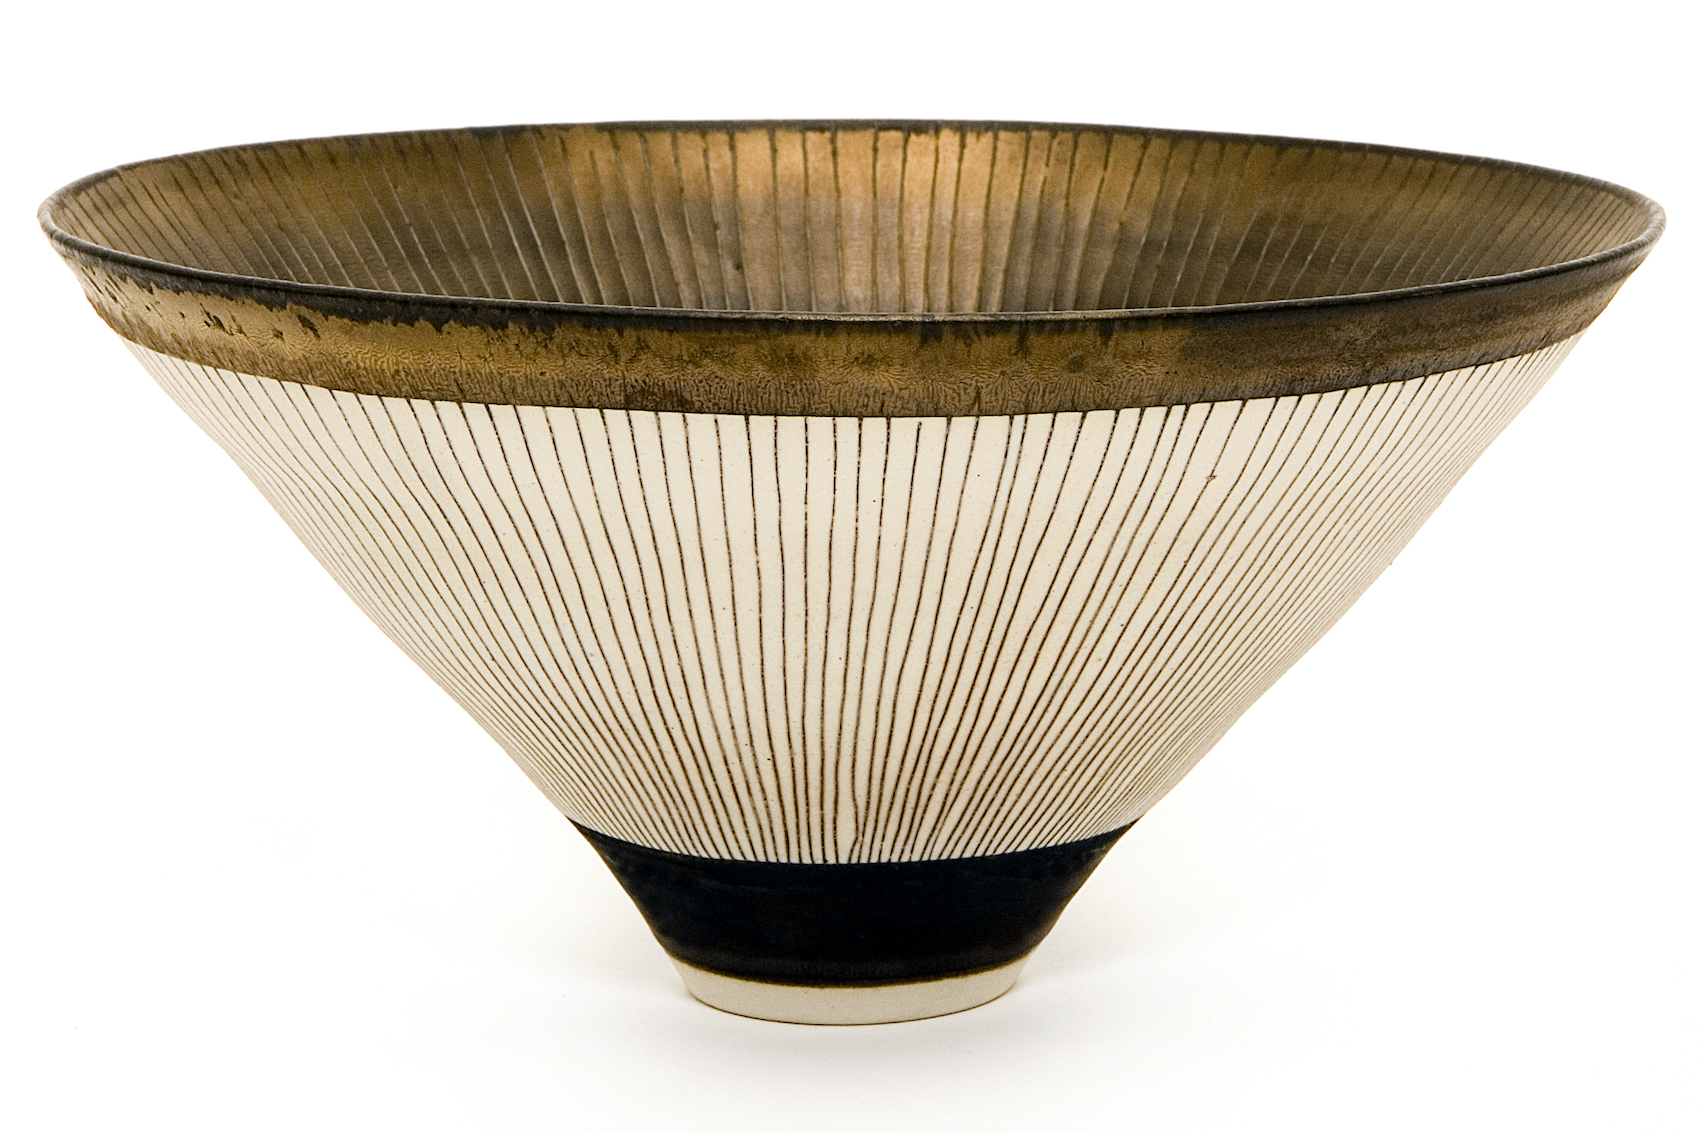  Lucy Rie bowl, 1977, from the Middlesbrough Collection